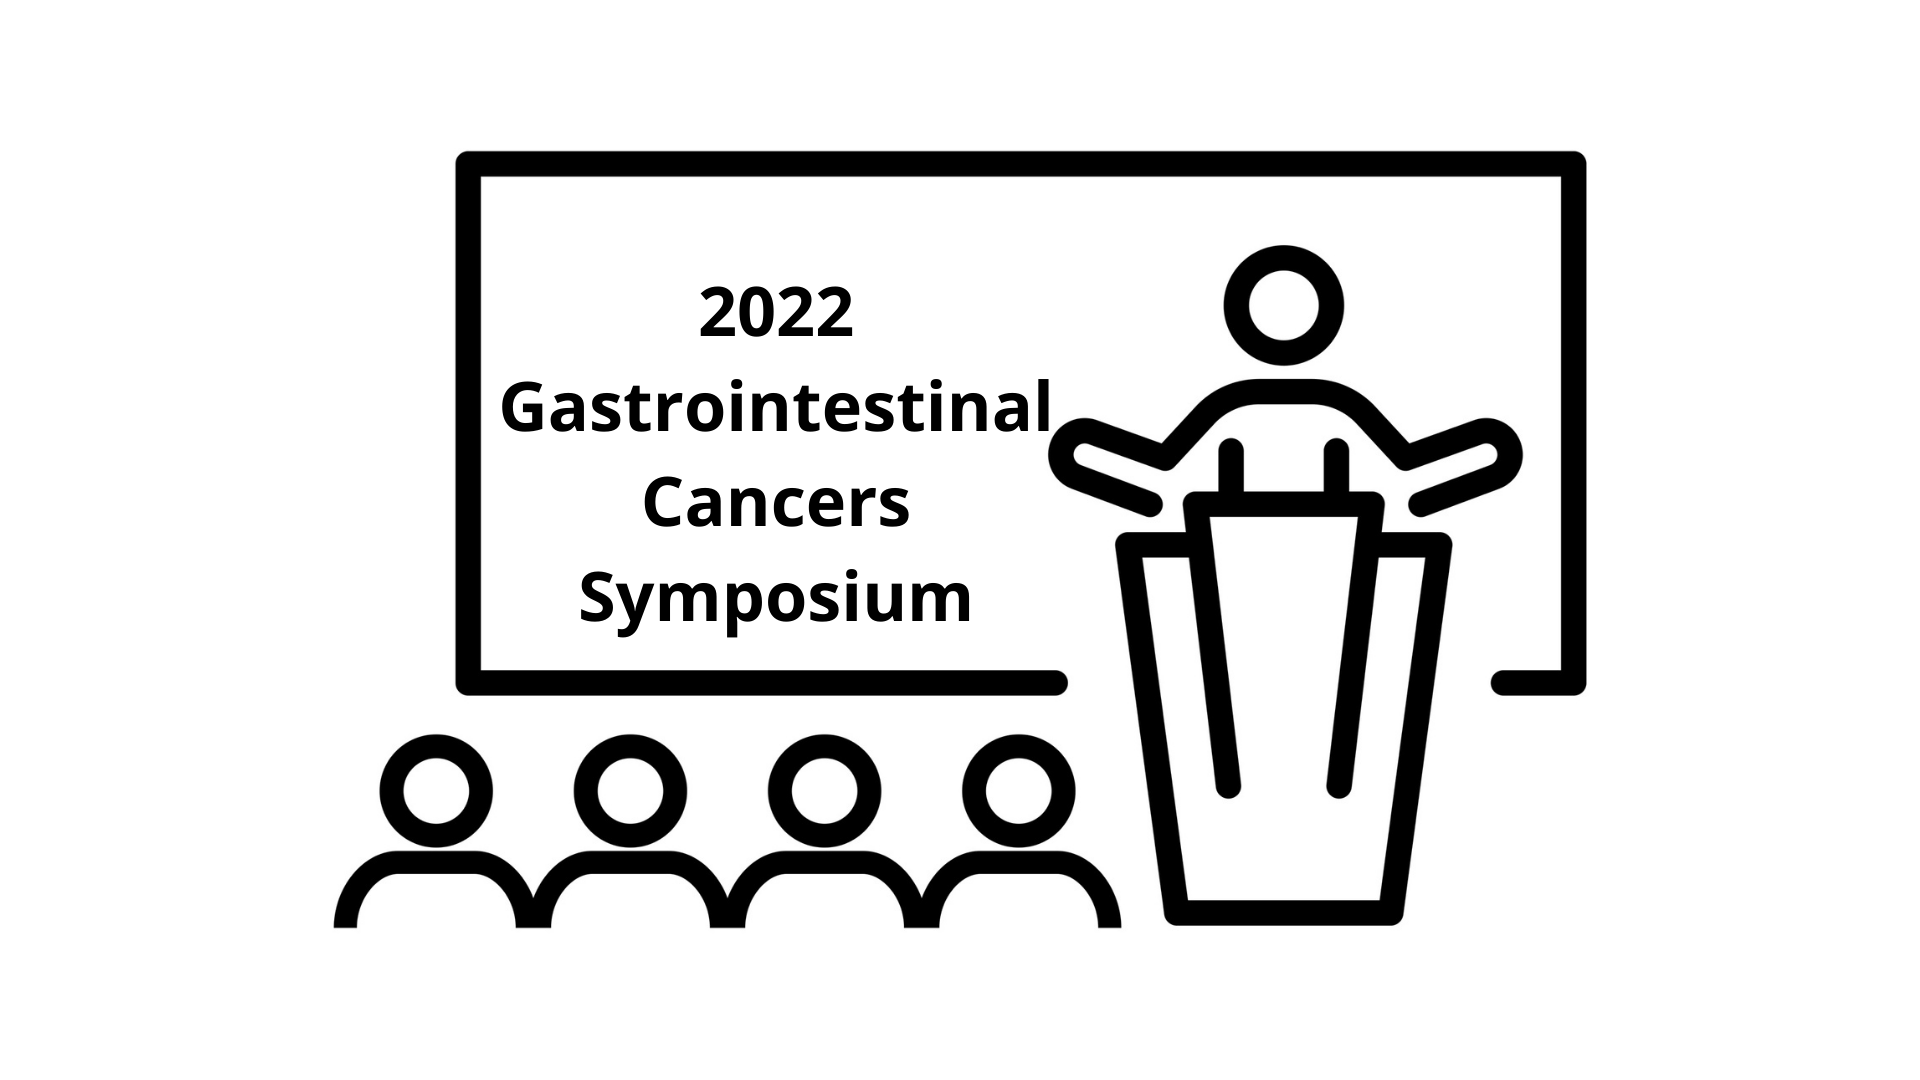 Trastuzumab Deruxtecan Extends Overall Survival in HER2+ Advanced Gastric/GEJ Cancer